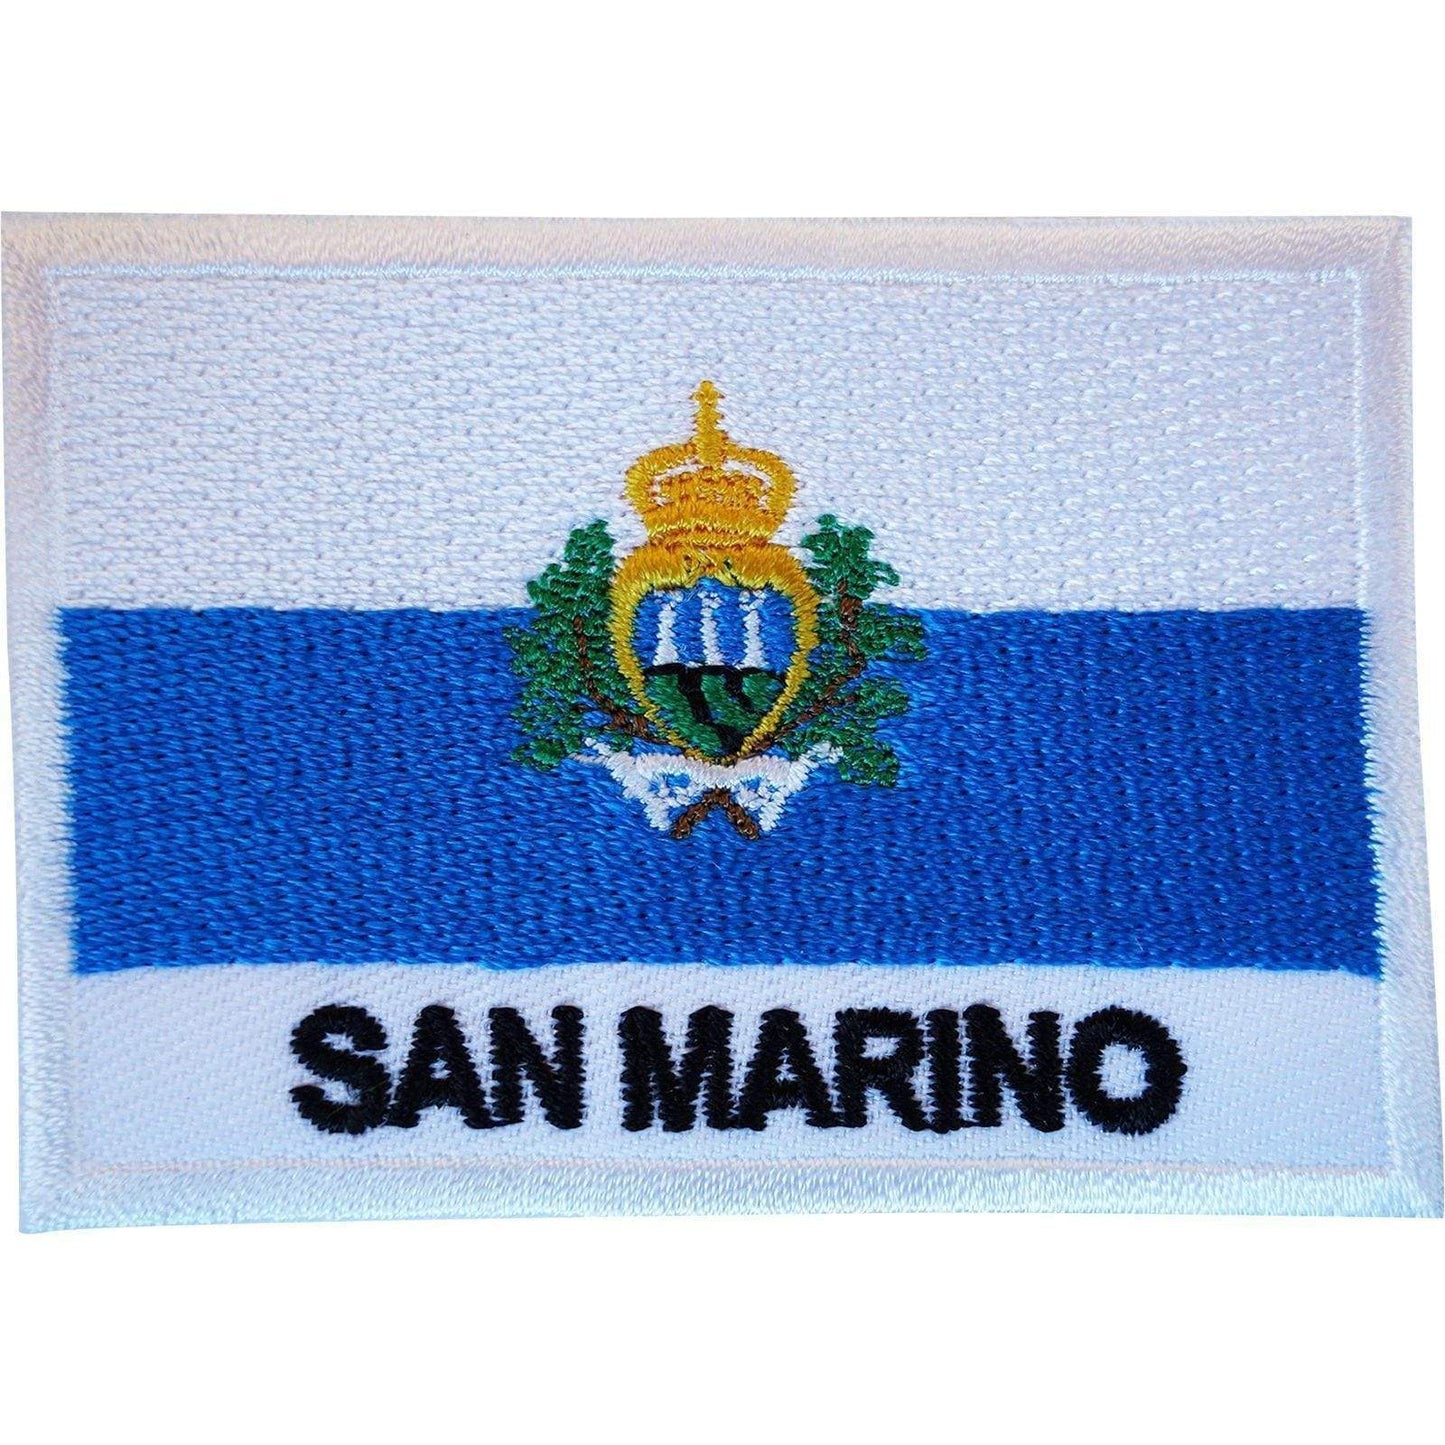 San Marino Flag Patch Iron On Sew On Embroidery Badge Embroidered Applique Italy